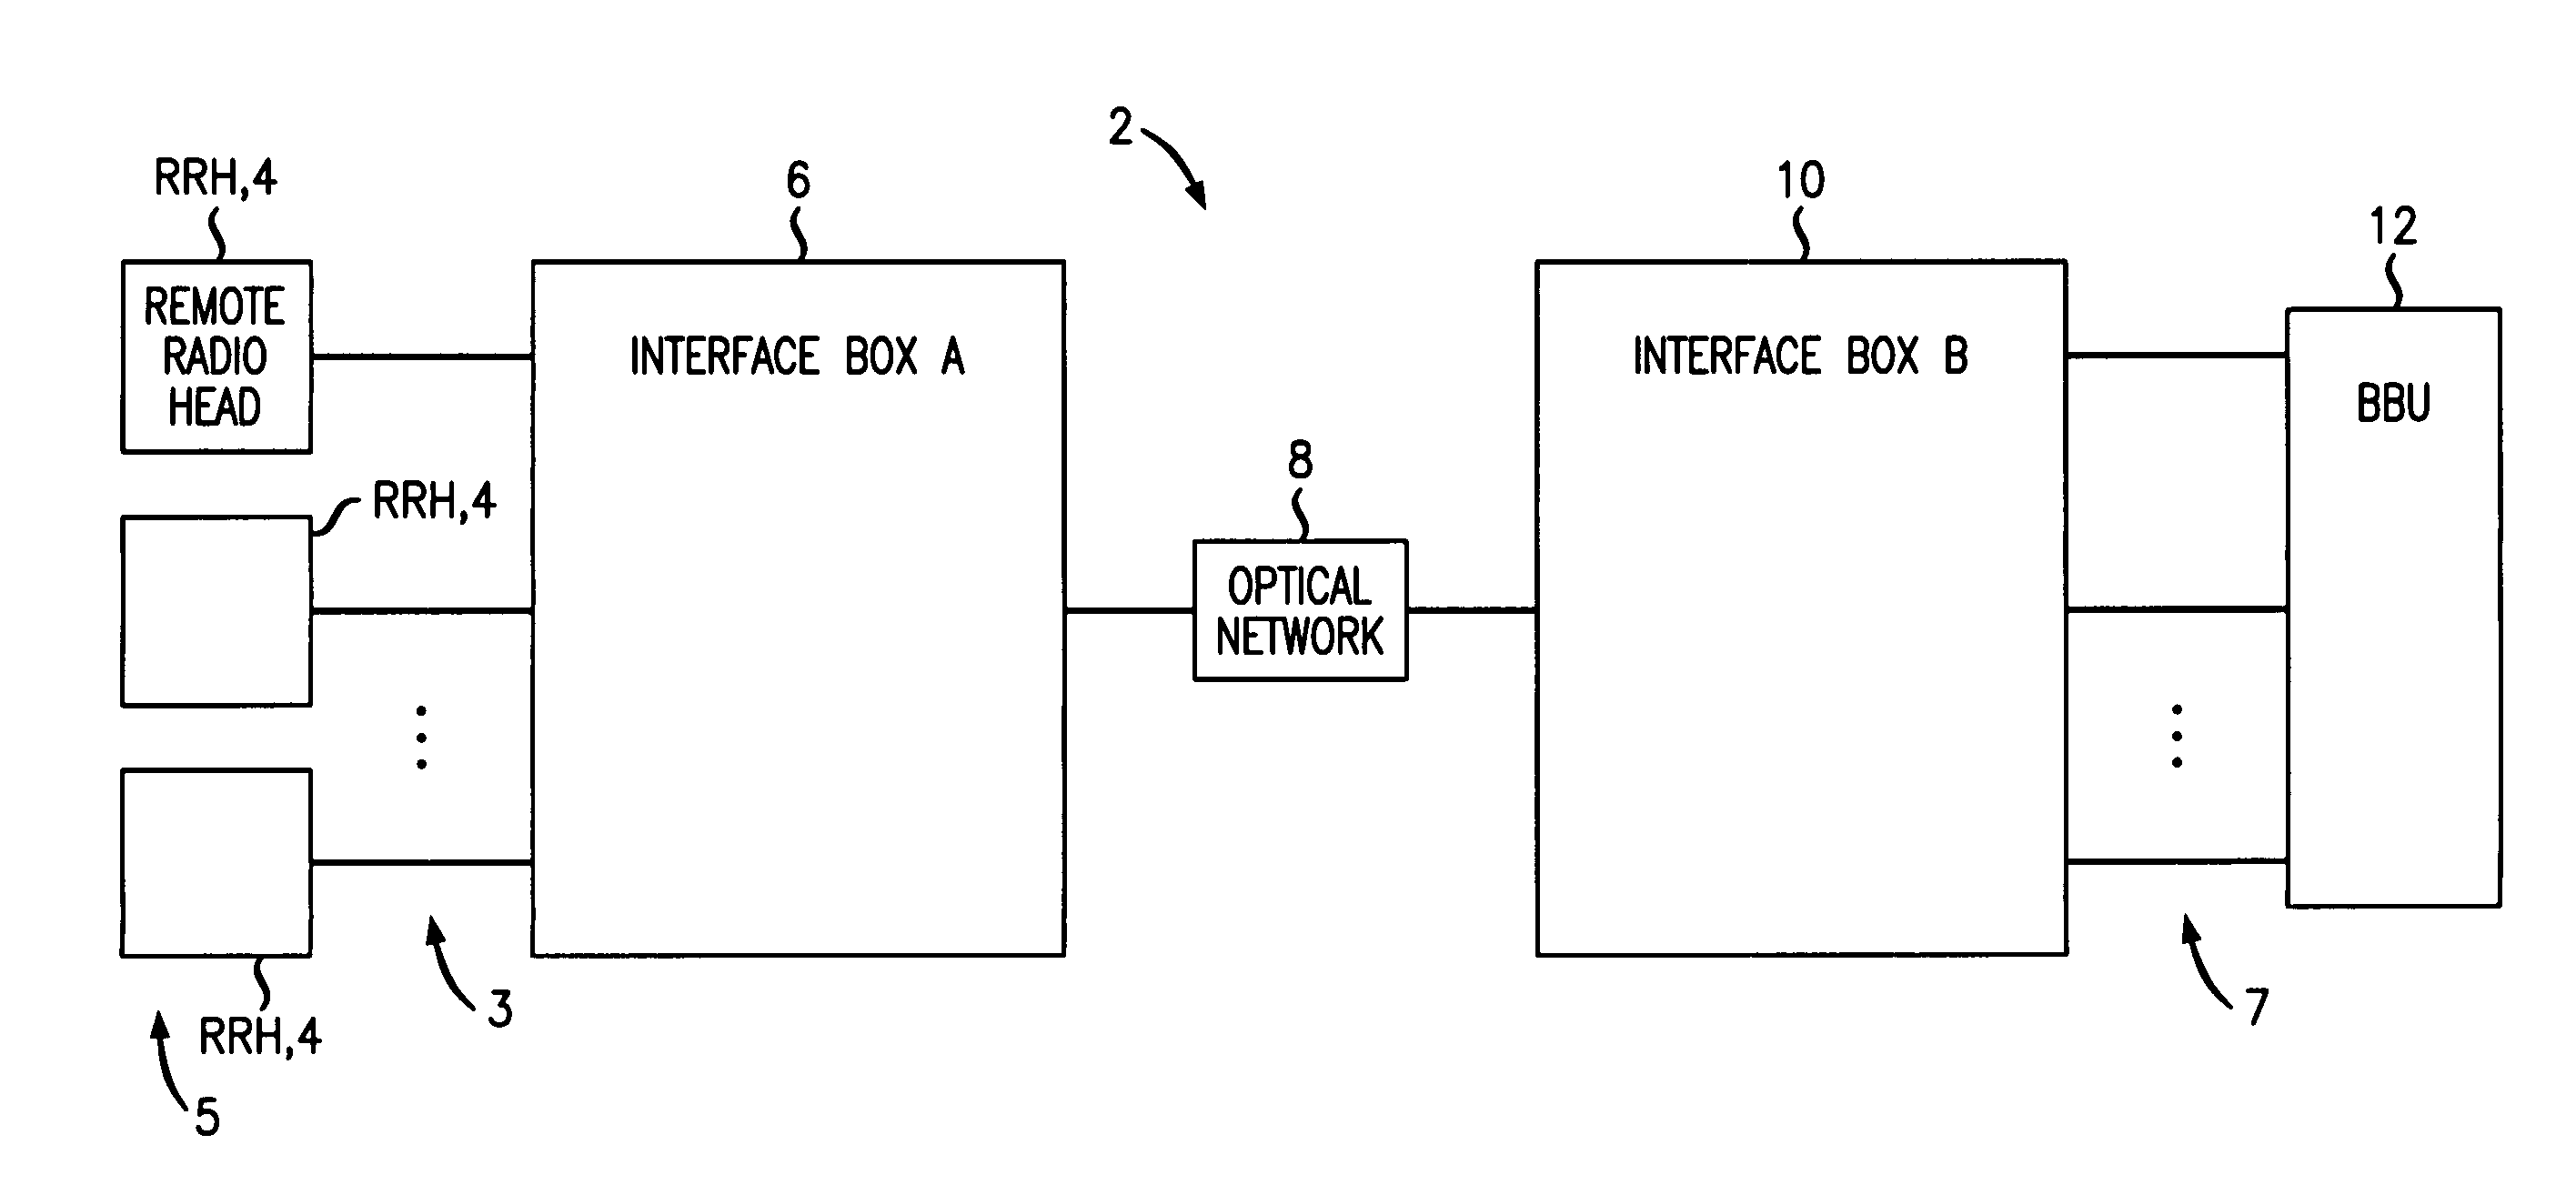 A method of processing a digital signal for transmission, a method of processing an optical data unit upon reception, and a network element for a telecommunications network